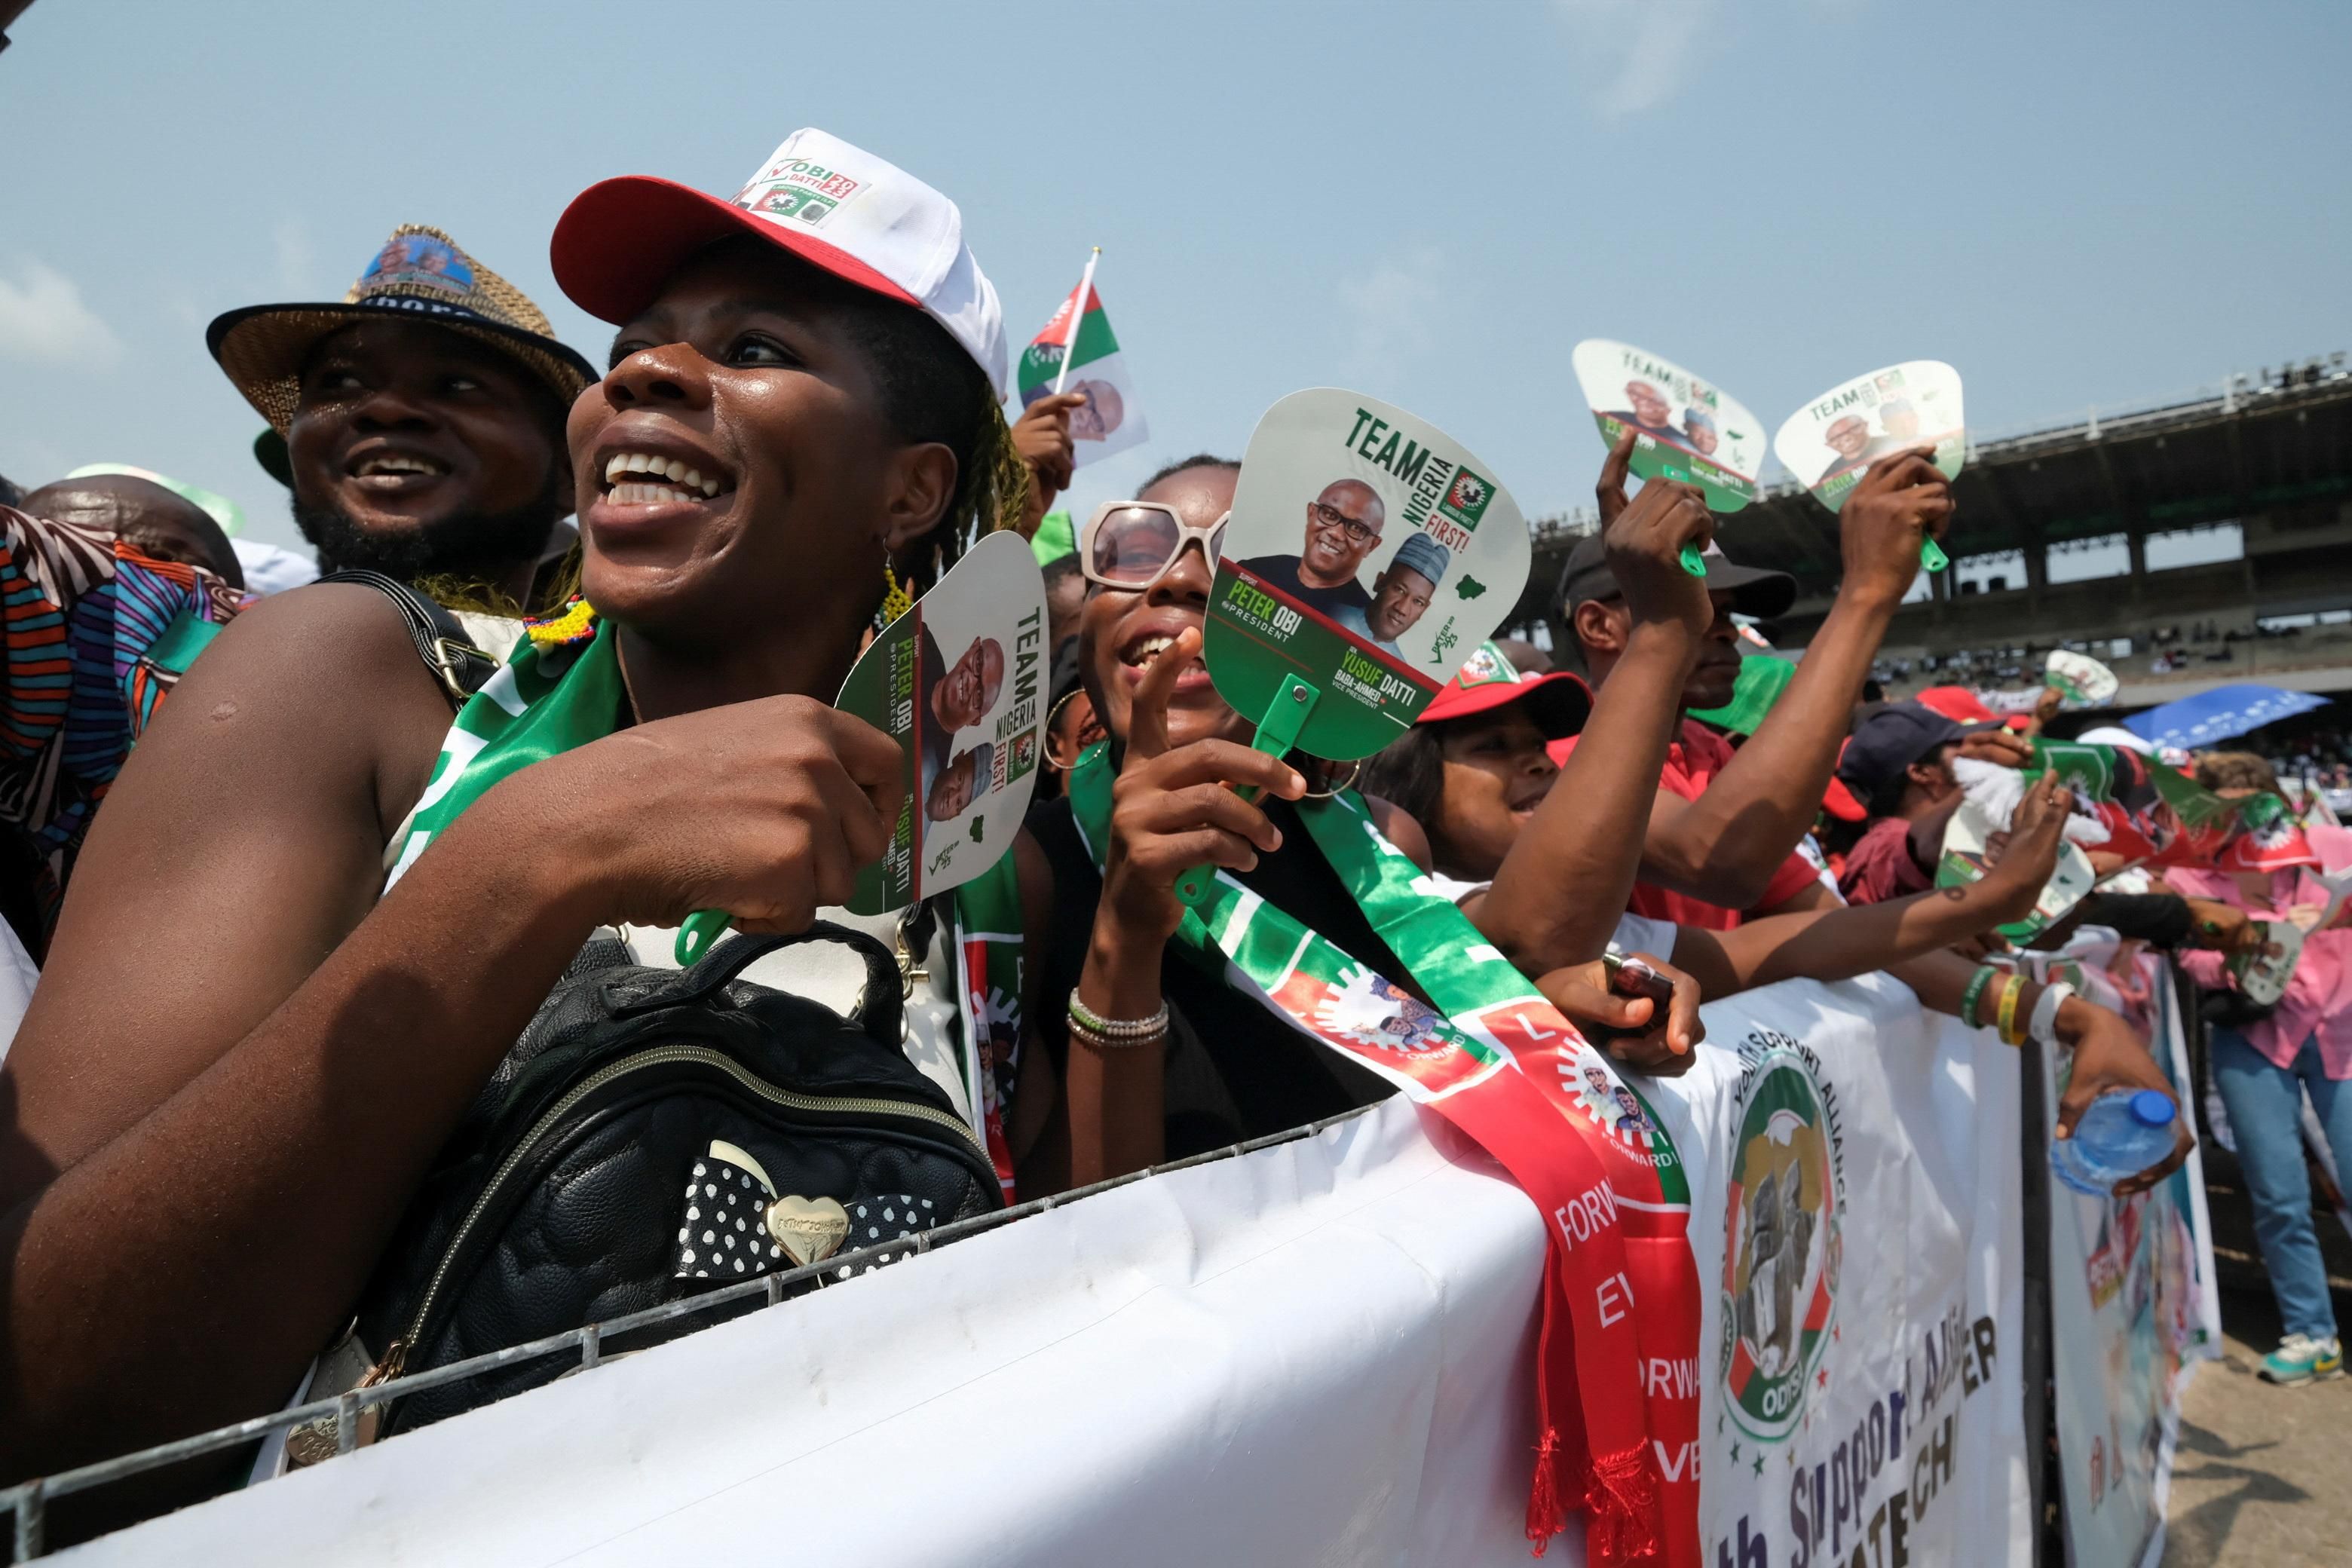 Supporters of Labour Party candidate Peter Obi attend a campaign rally in Lagos.